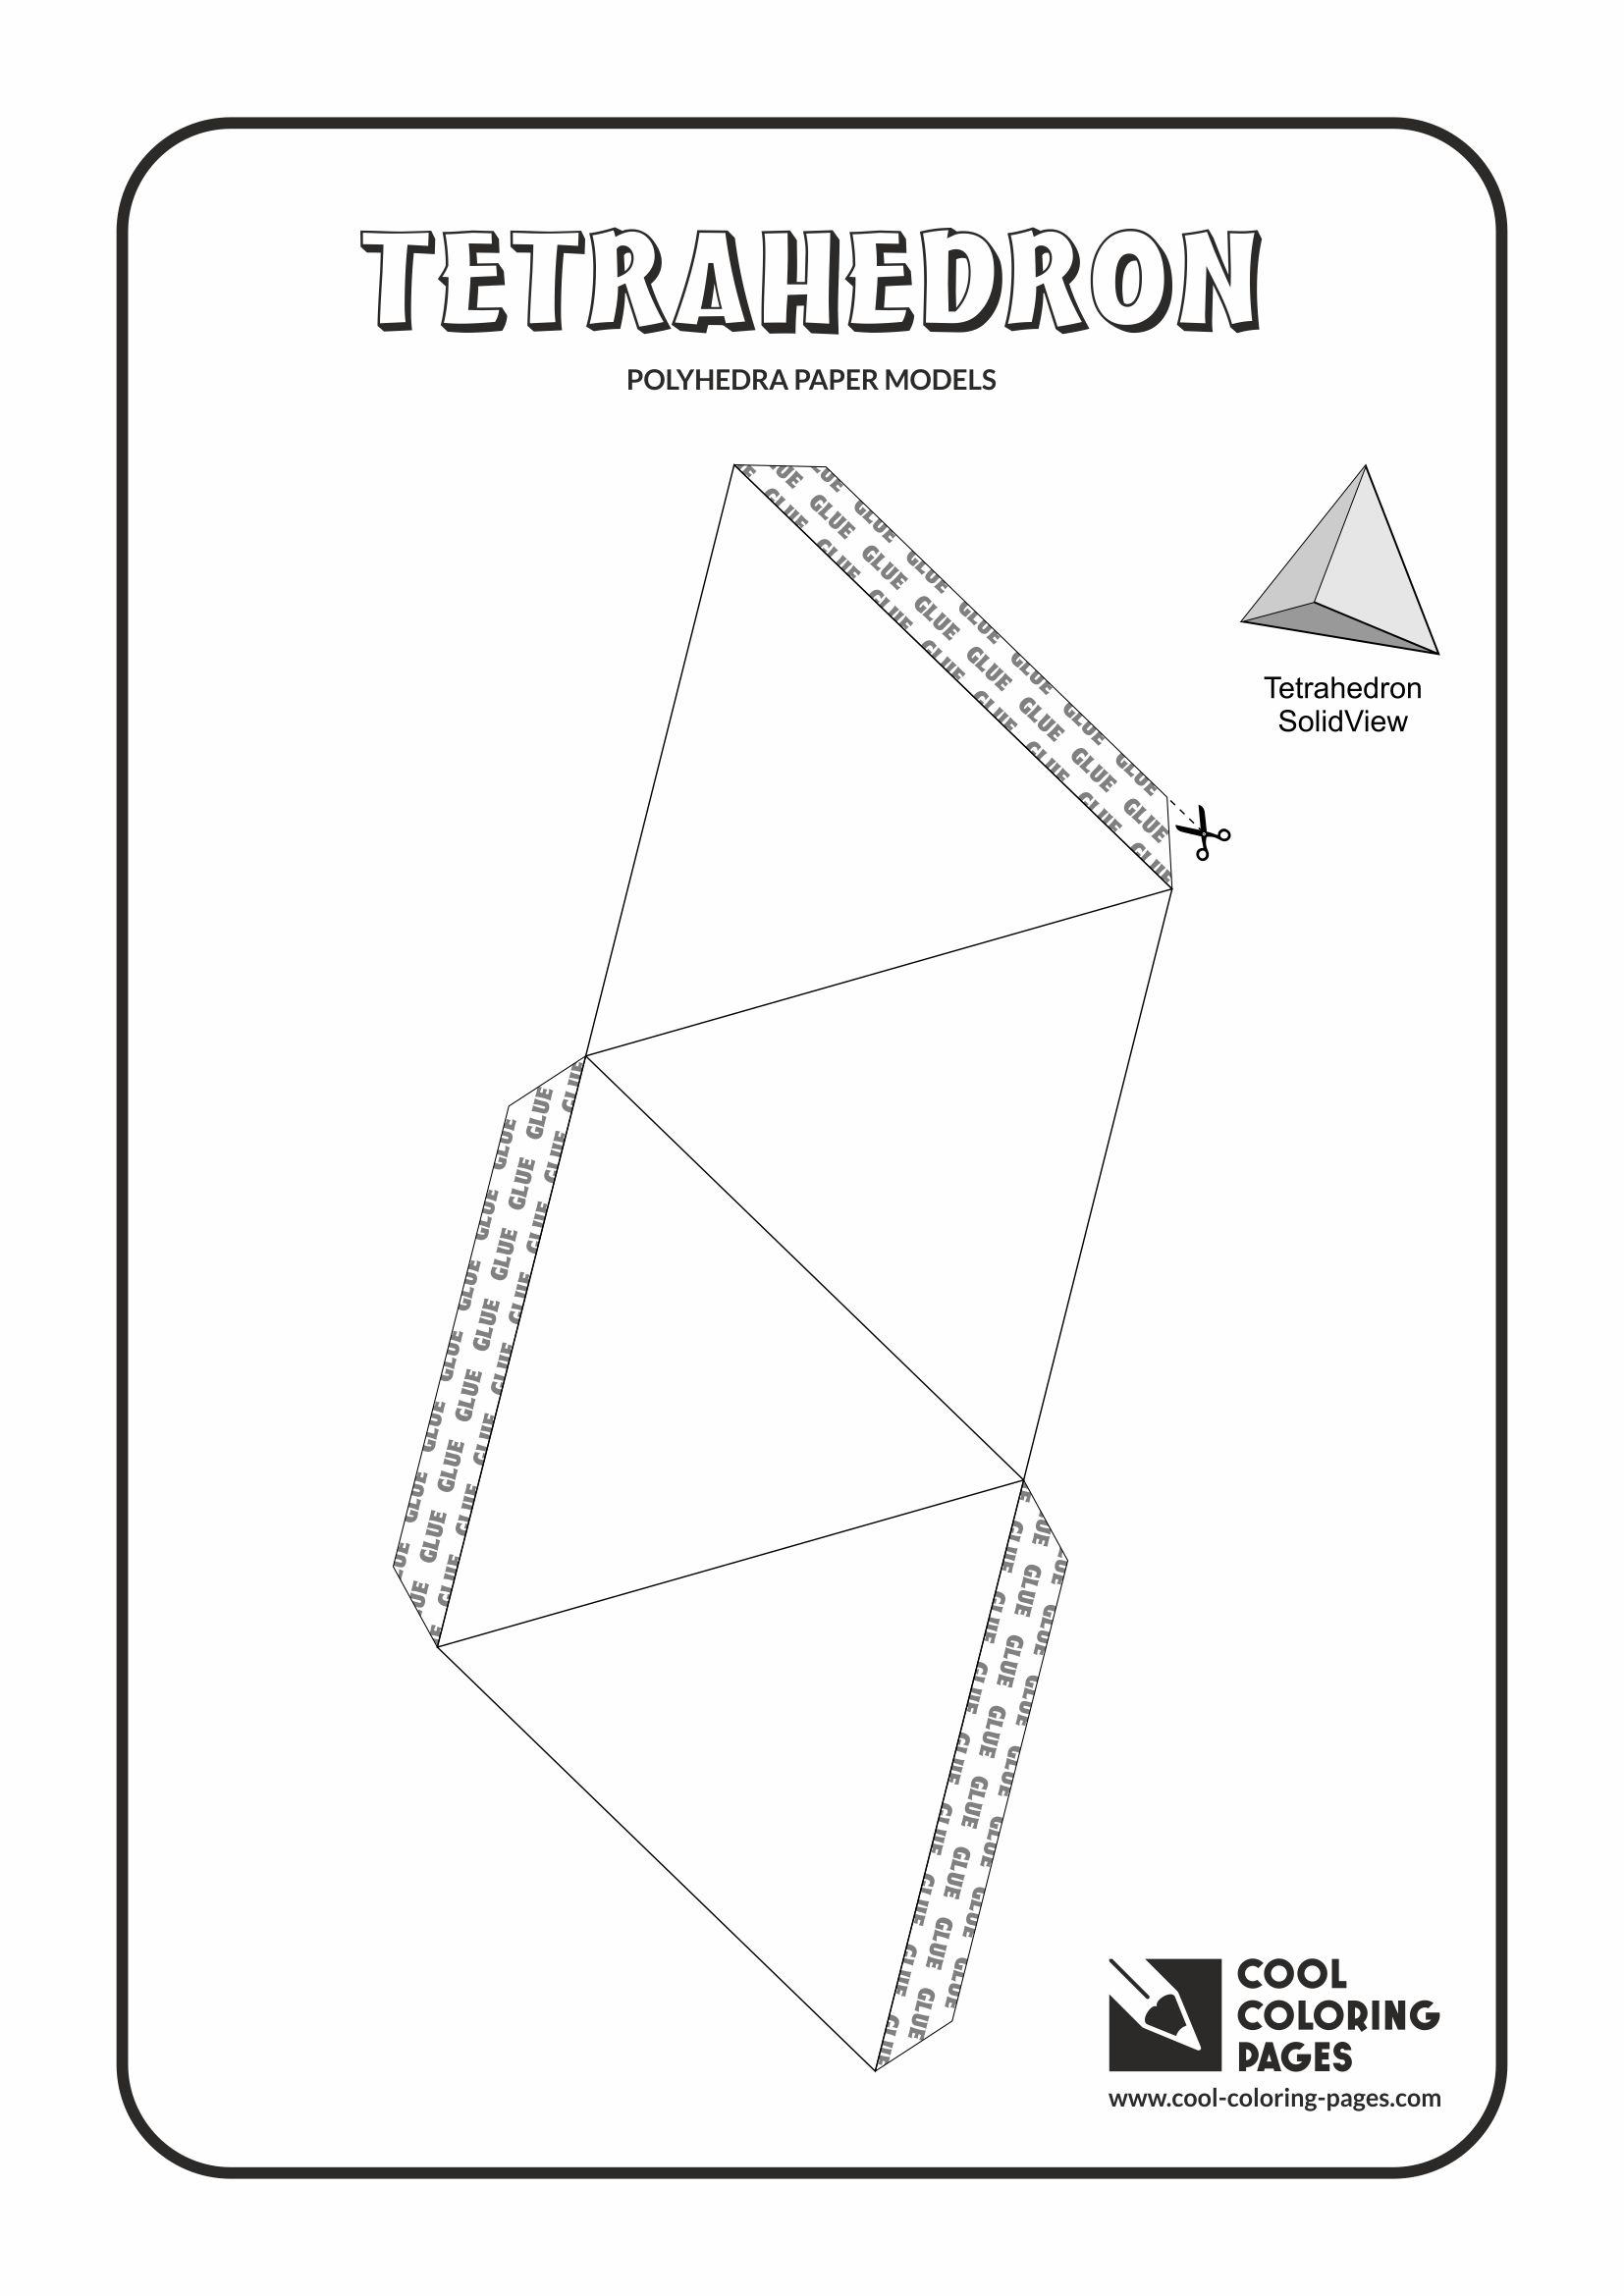 Cool Coloring Pages - Paper models of polyhedra / Paper solids models / Tetrahedron